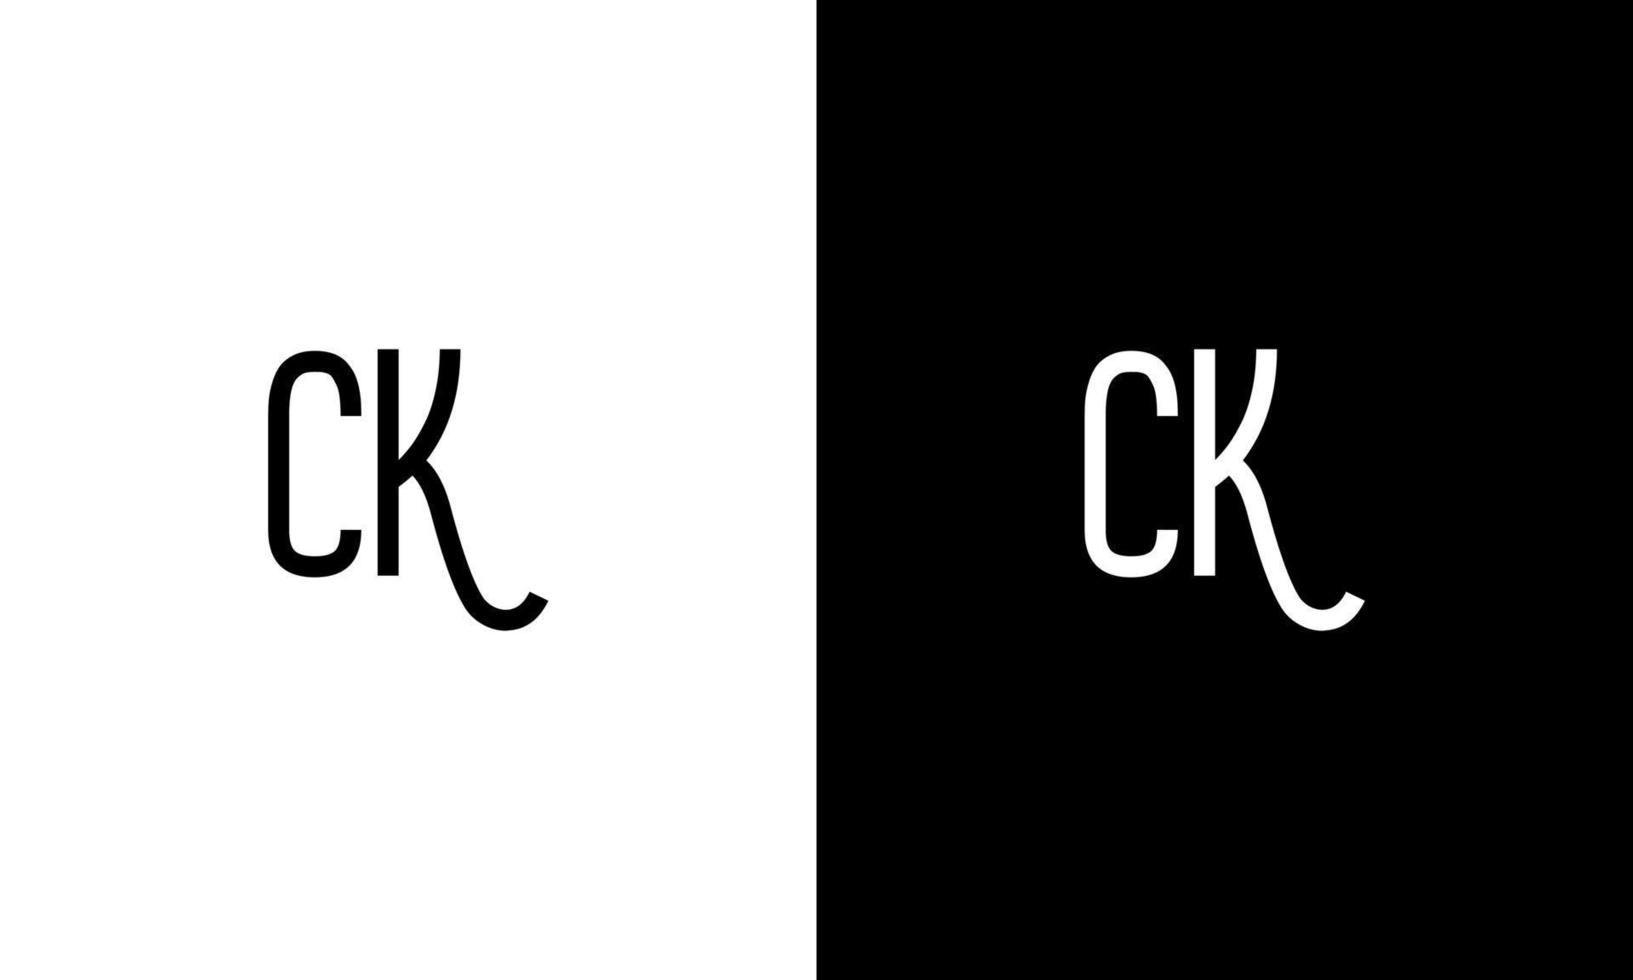 Letter CK vector logo free template Free Vector